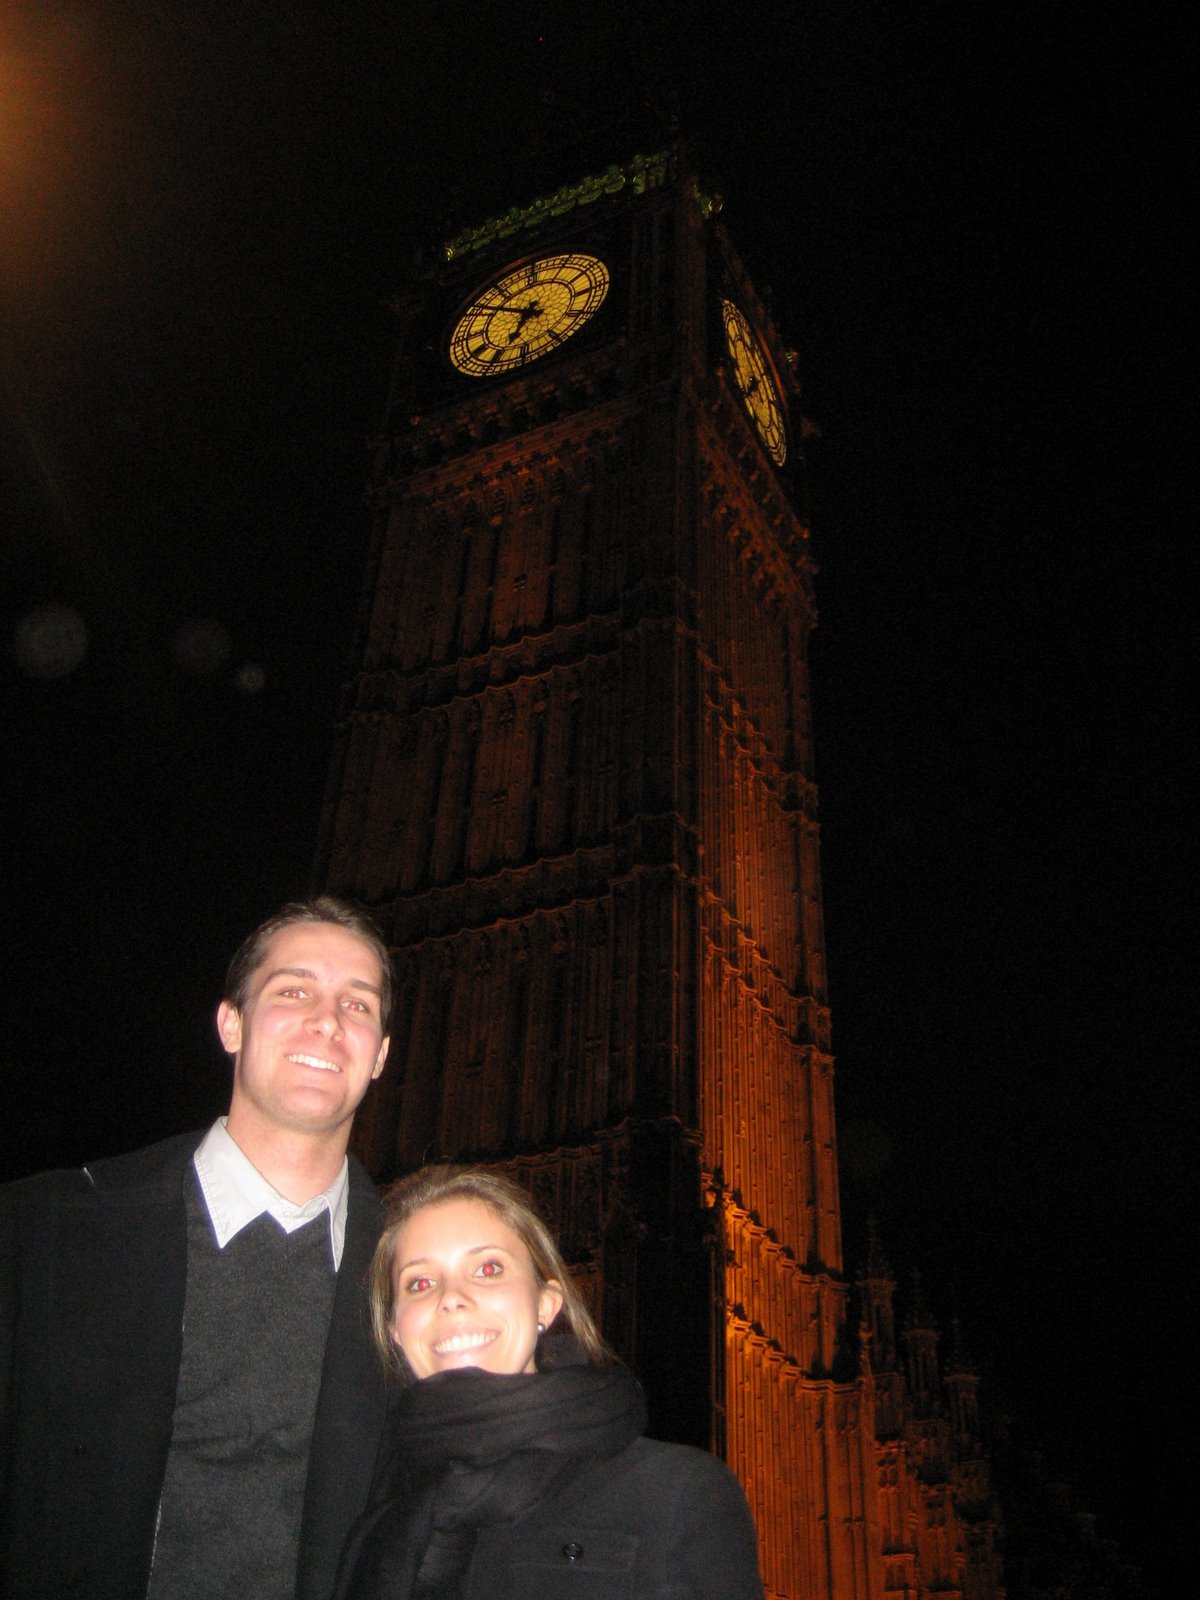 [Michelle+and+Wolf+in+London+031.jpg]